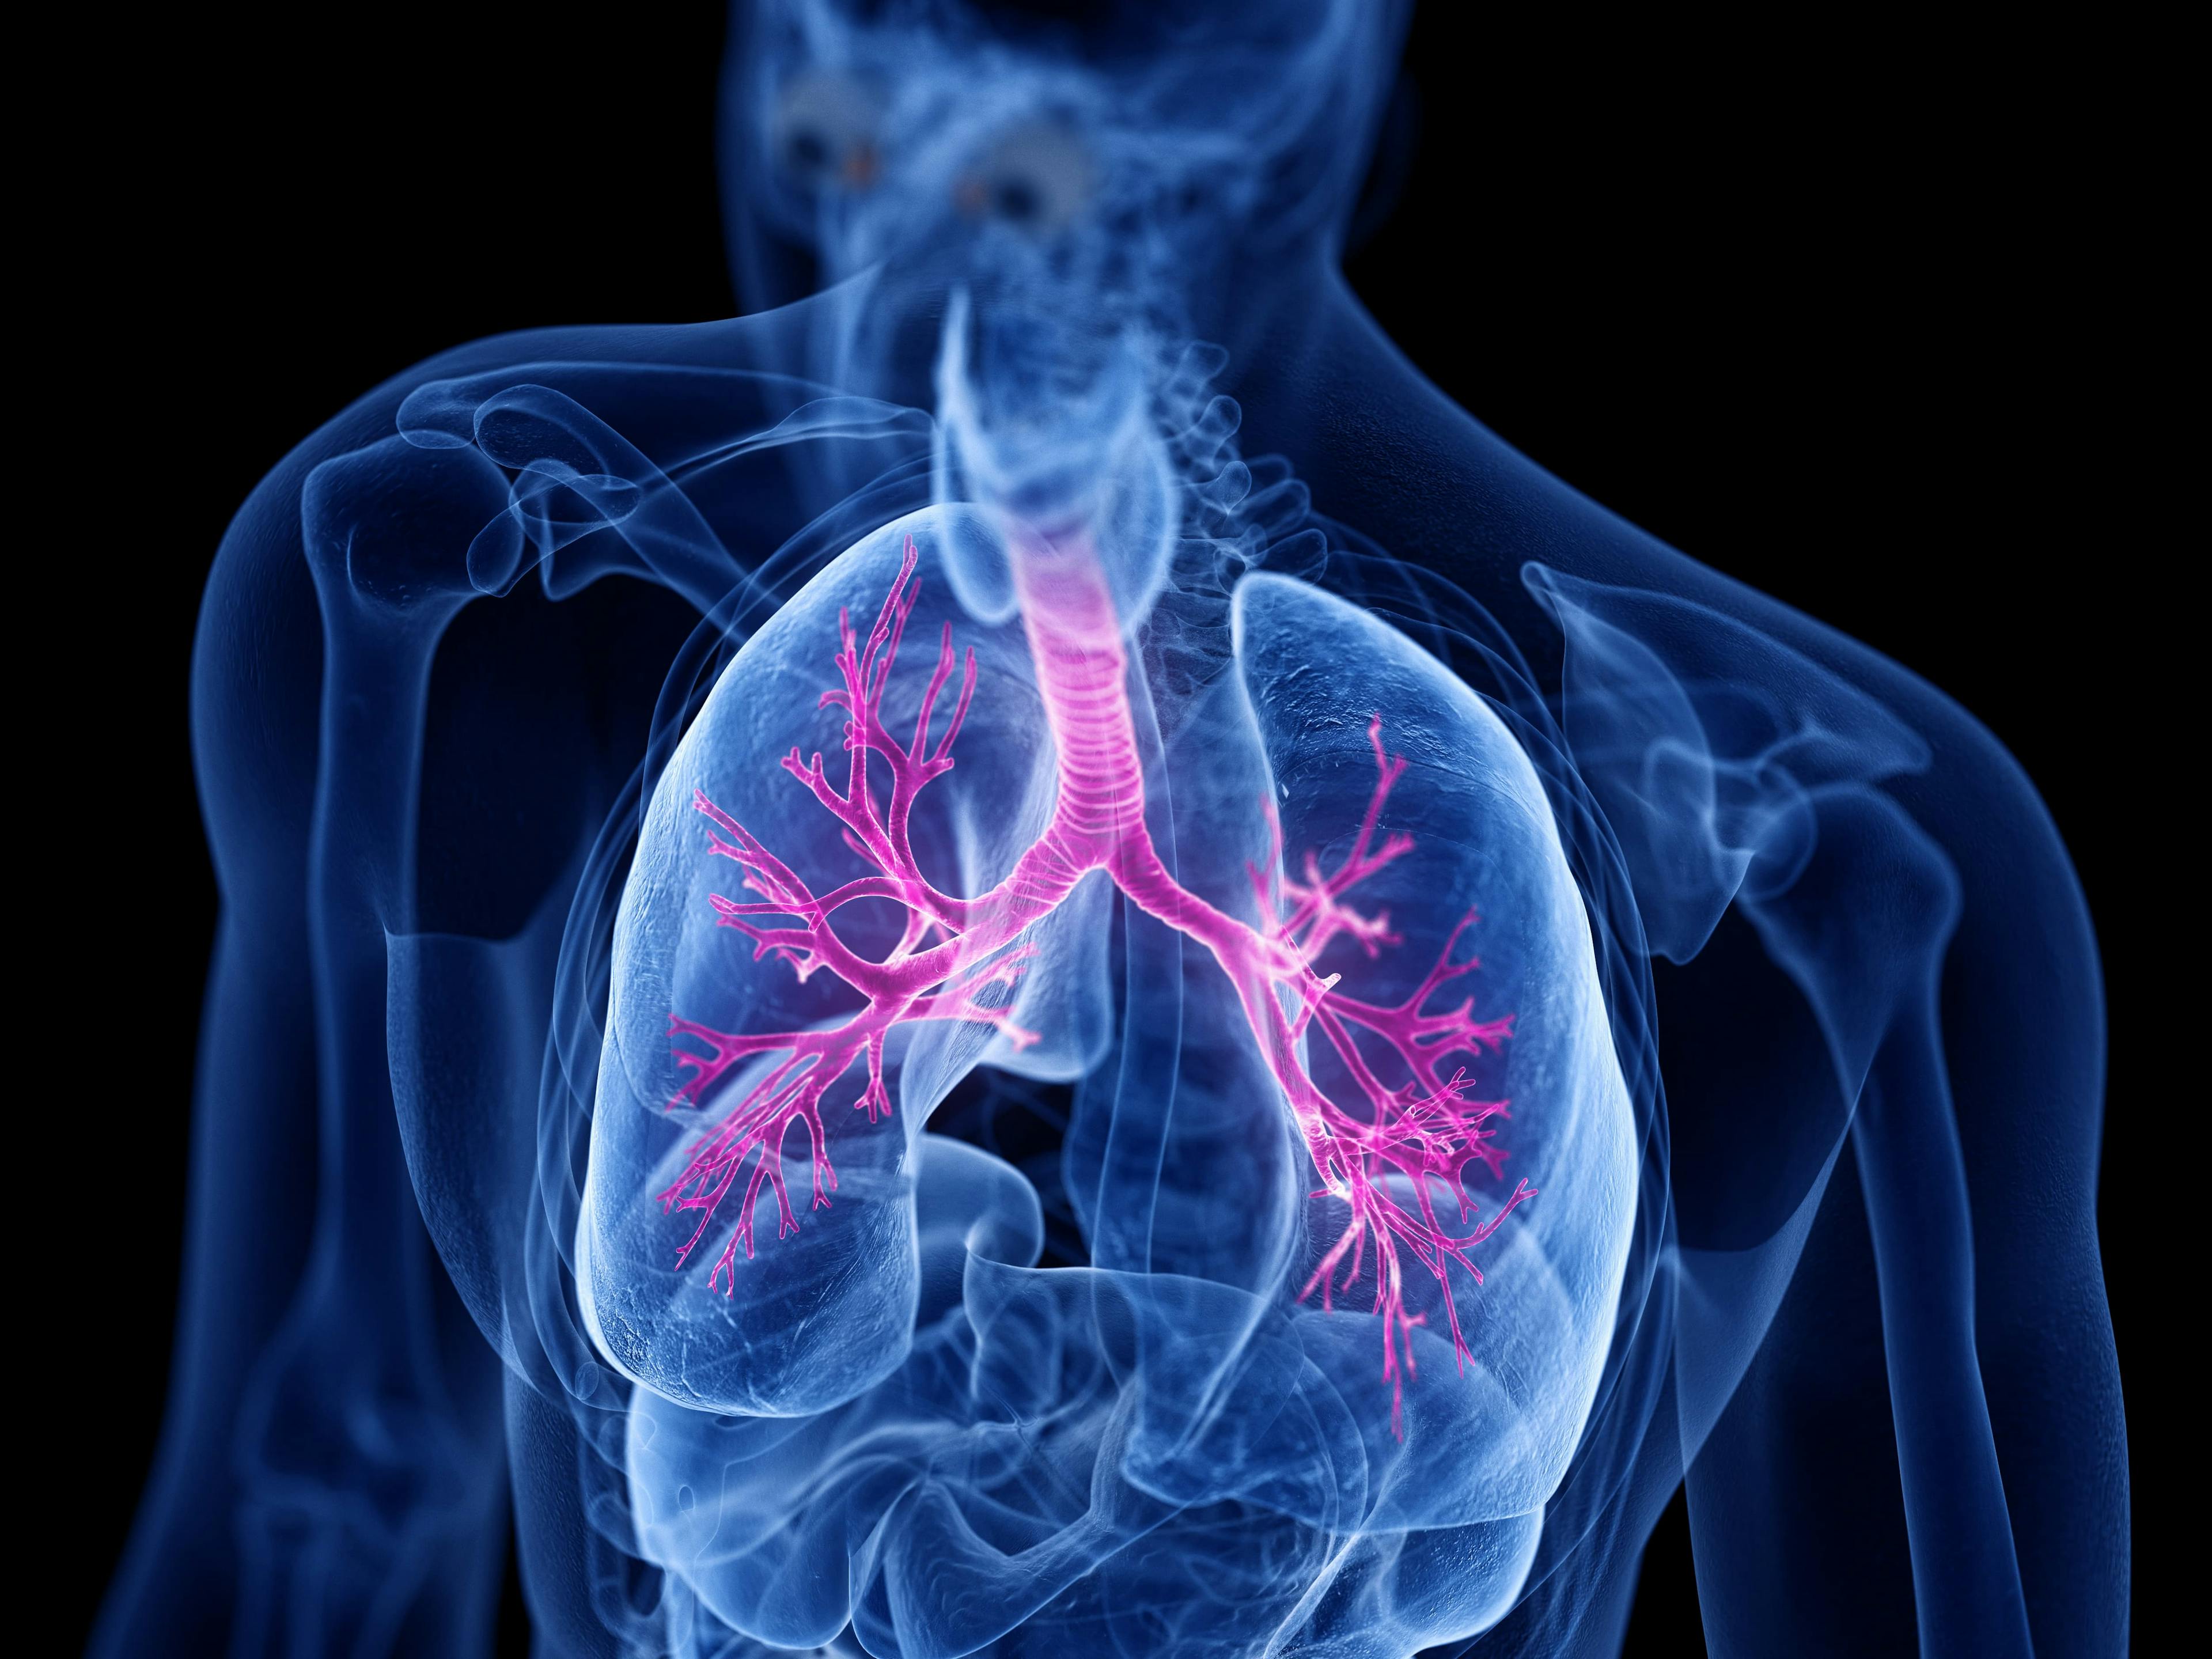 Cystic Fibrosis Gene Therapy Well-Tolerated, Yields Transgene Expression in All 7 Participants 